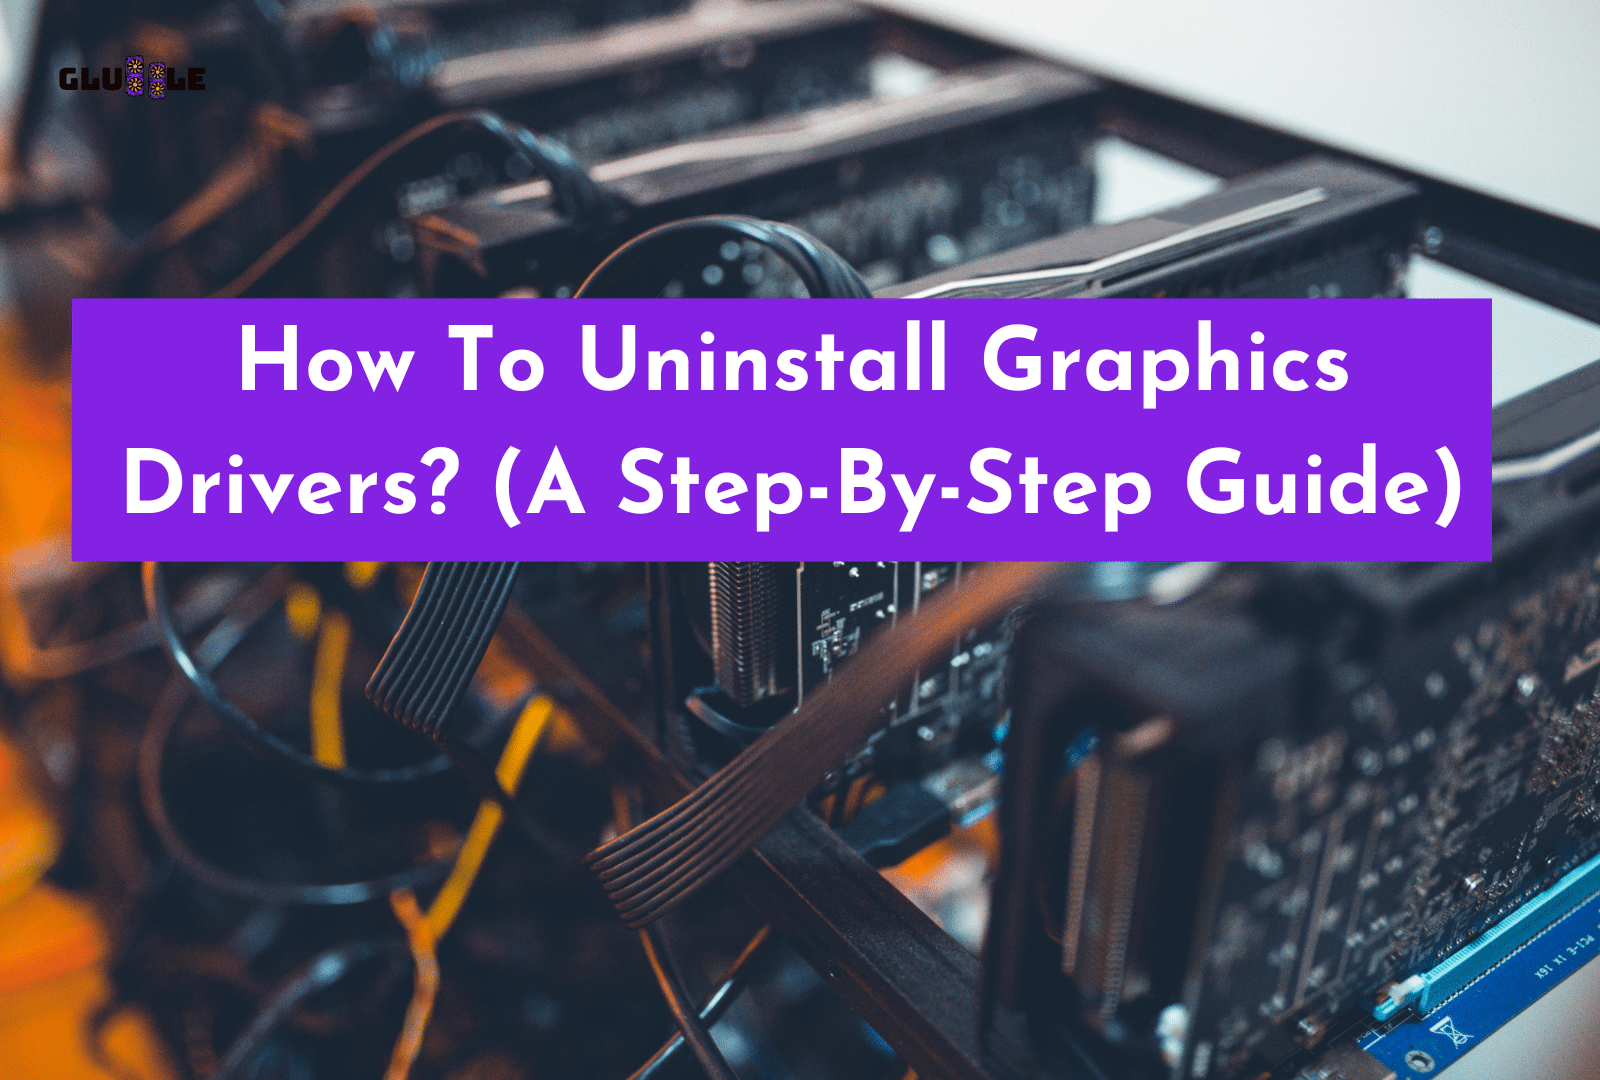 C:\Users\Mohsin\Downloads\How To Uninstall Graphics Drivers (A Step-By-Step Guide).png